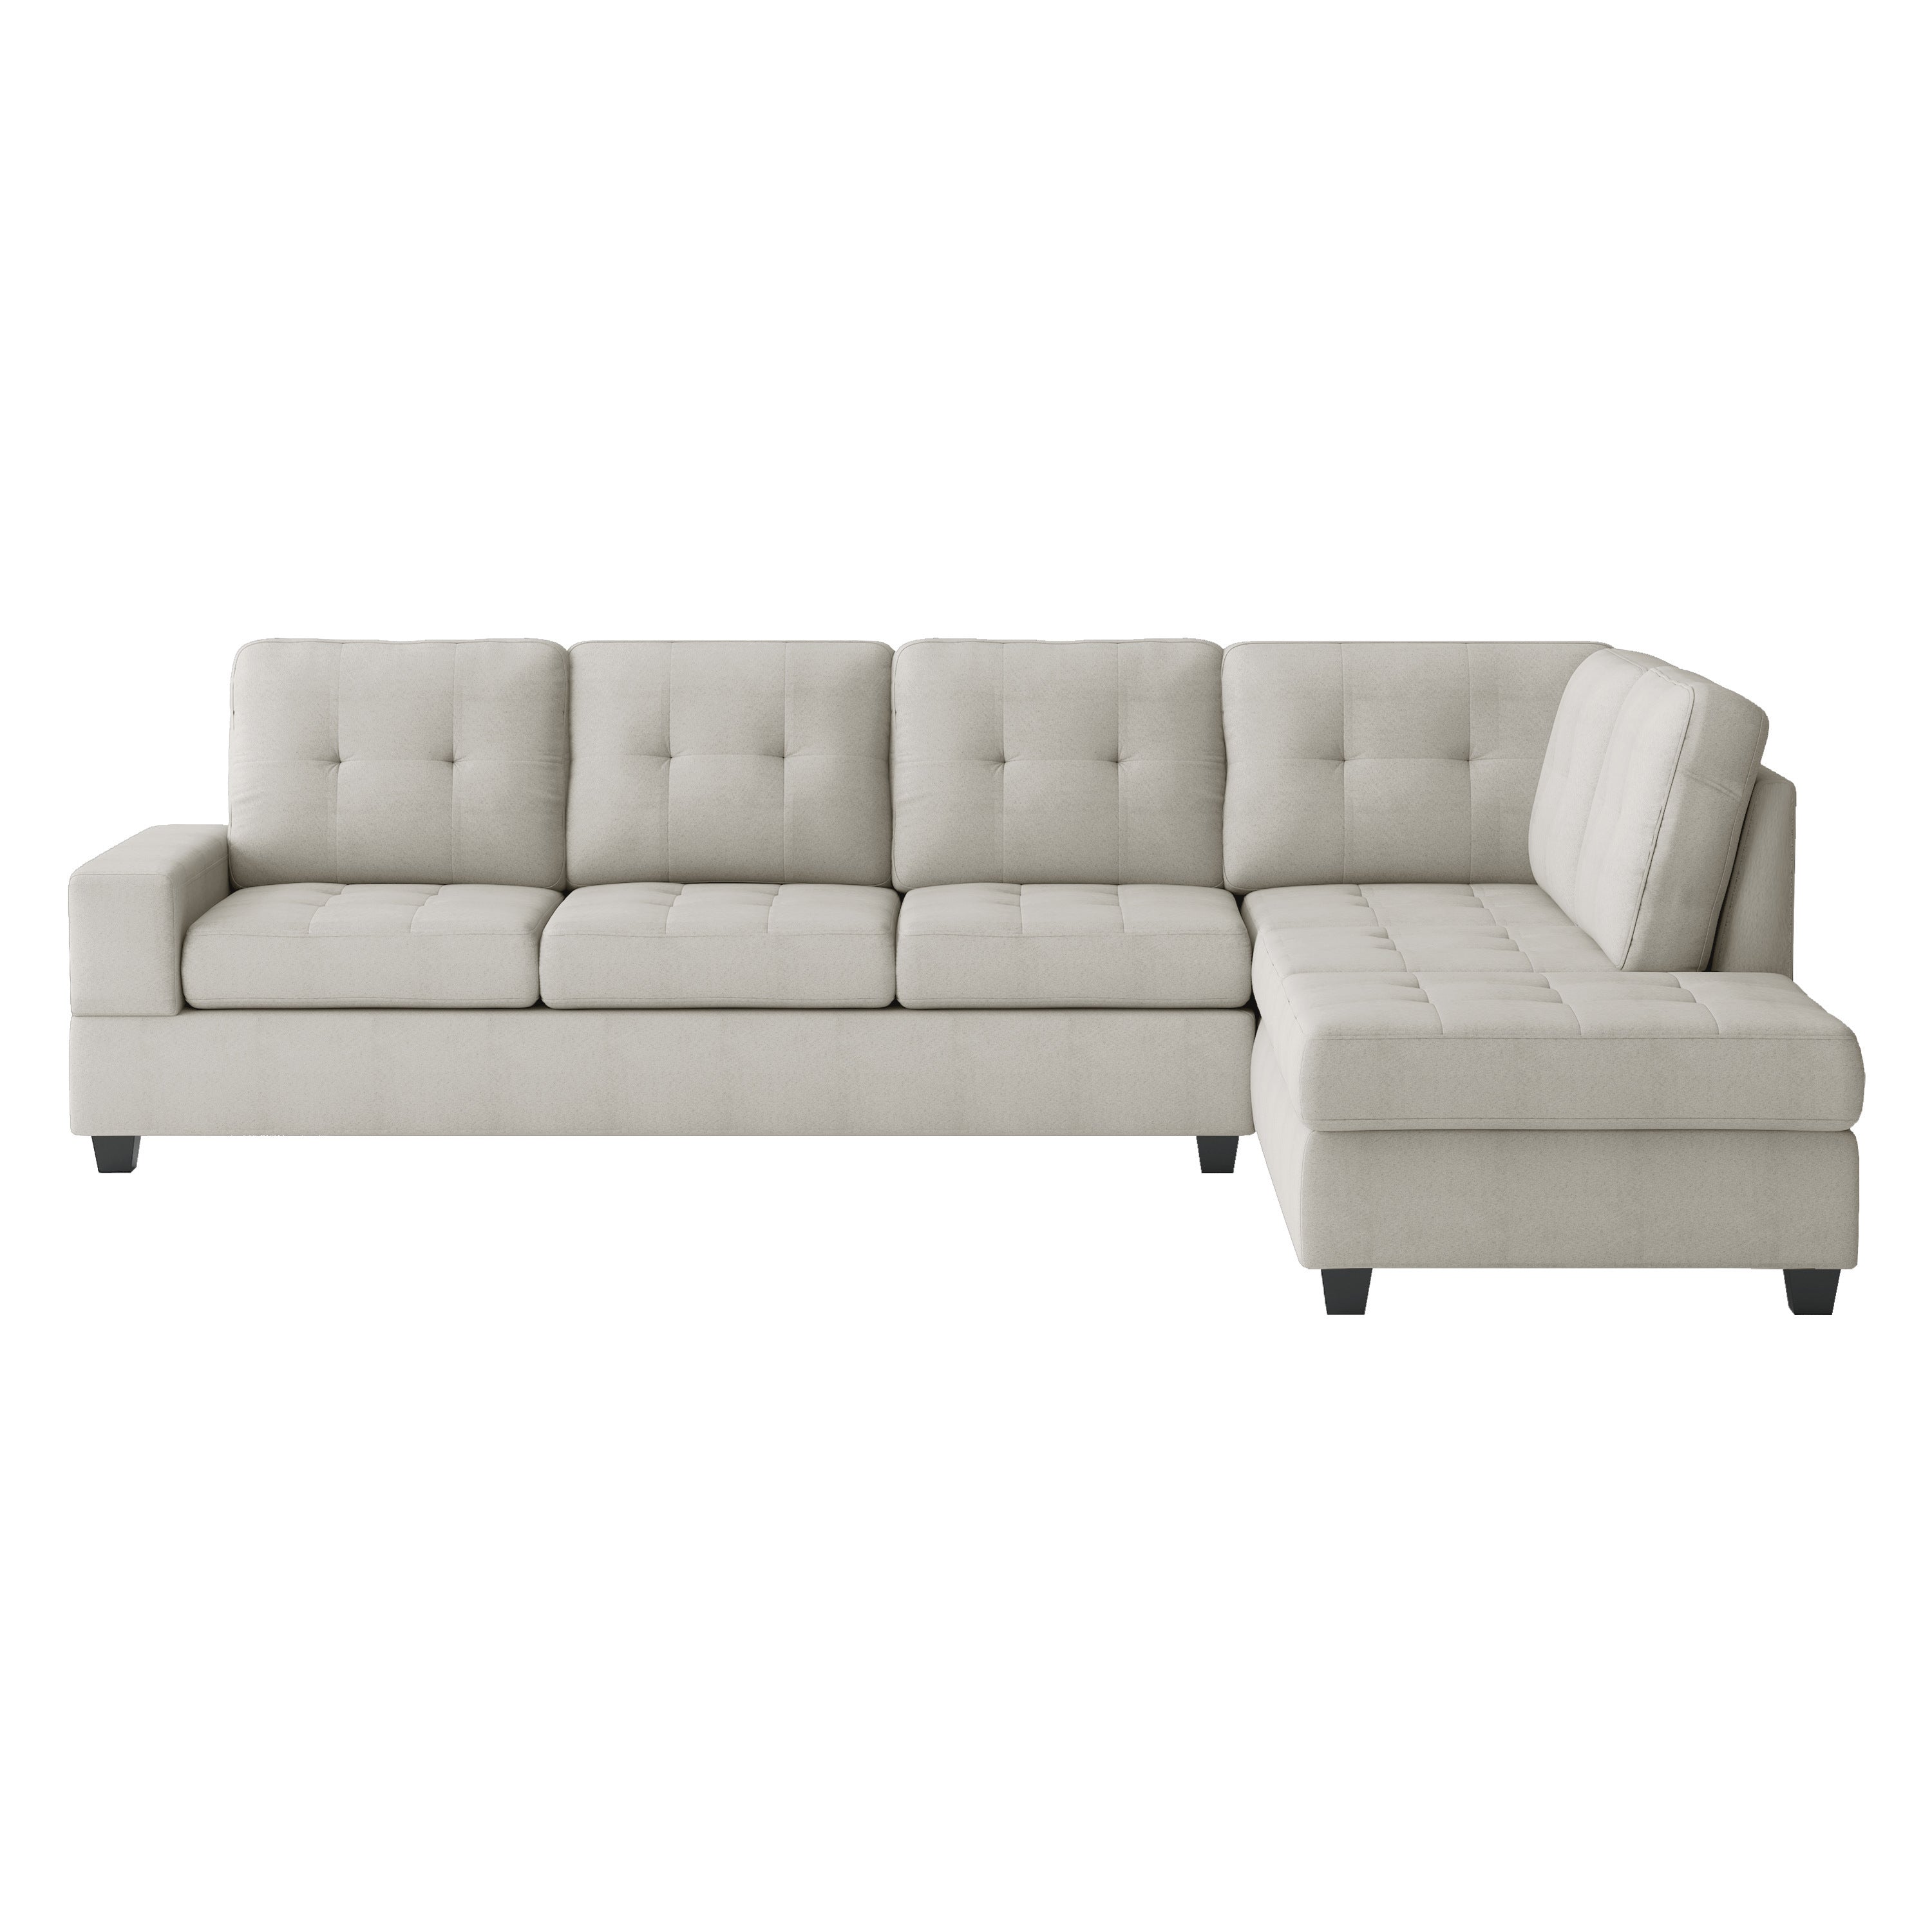 Maxine 3-piece Reversible Sectional w/ Ottoman in Gray